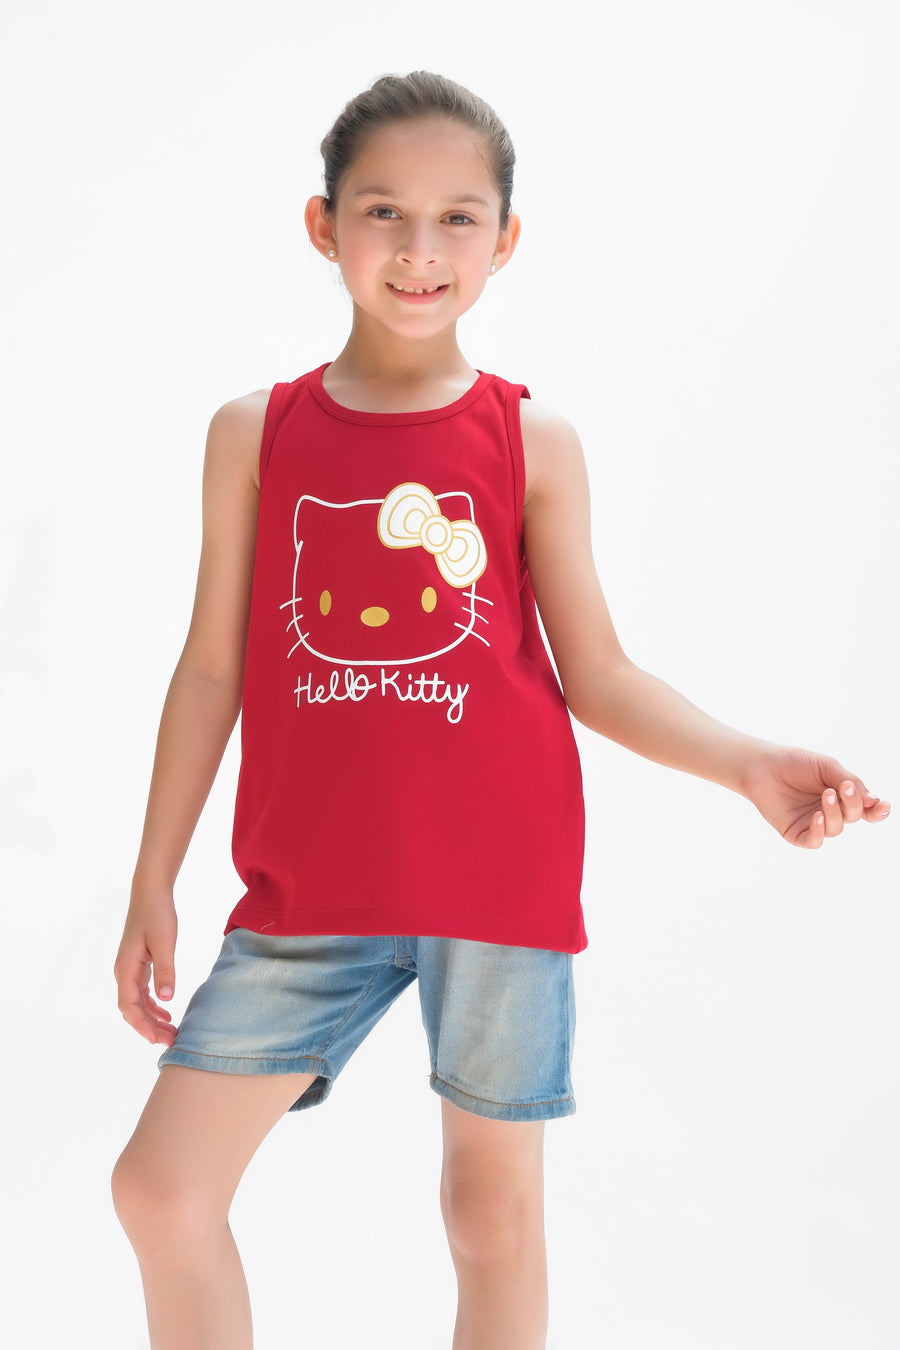 Hello Kitty Printed Sandos for Girls - Red